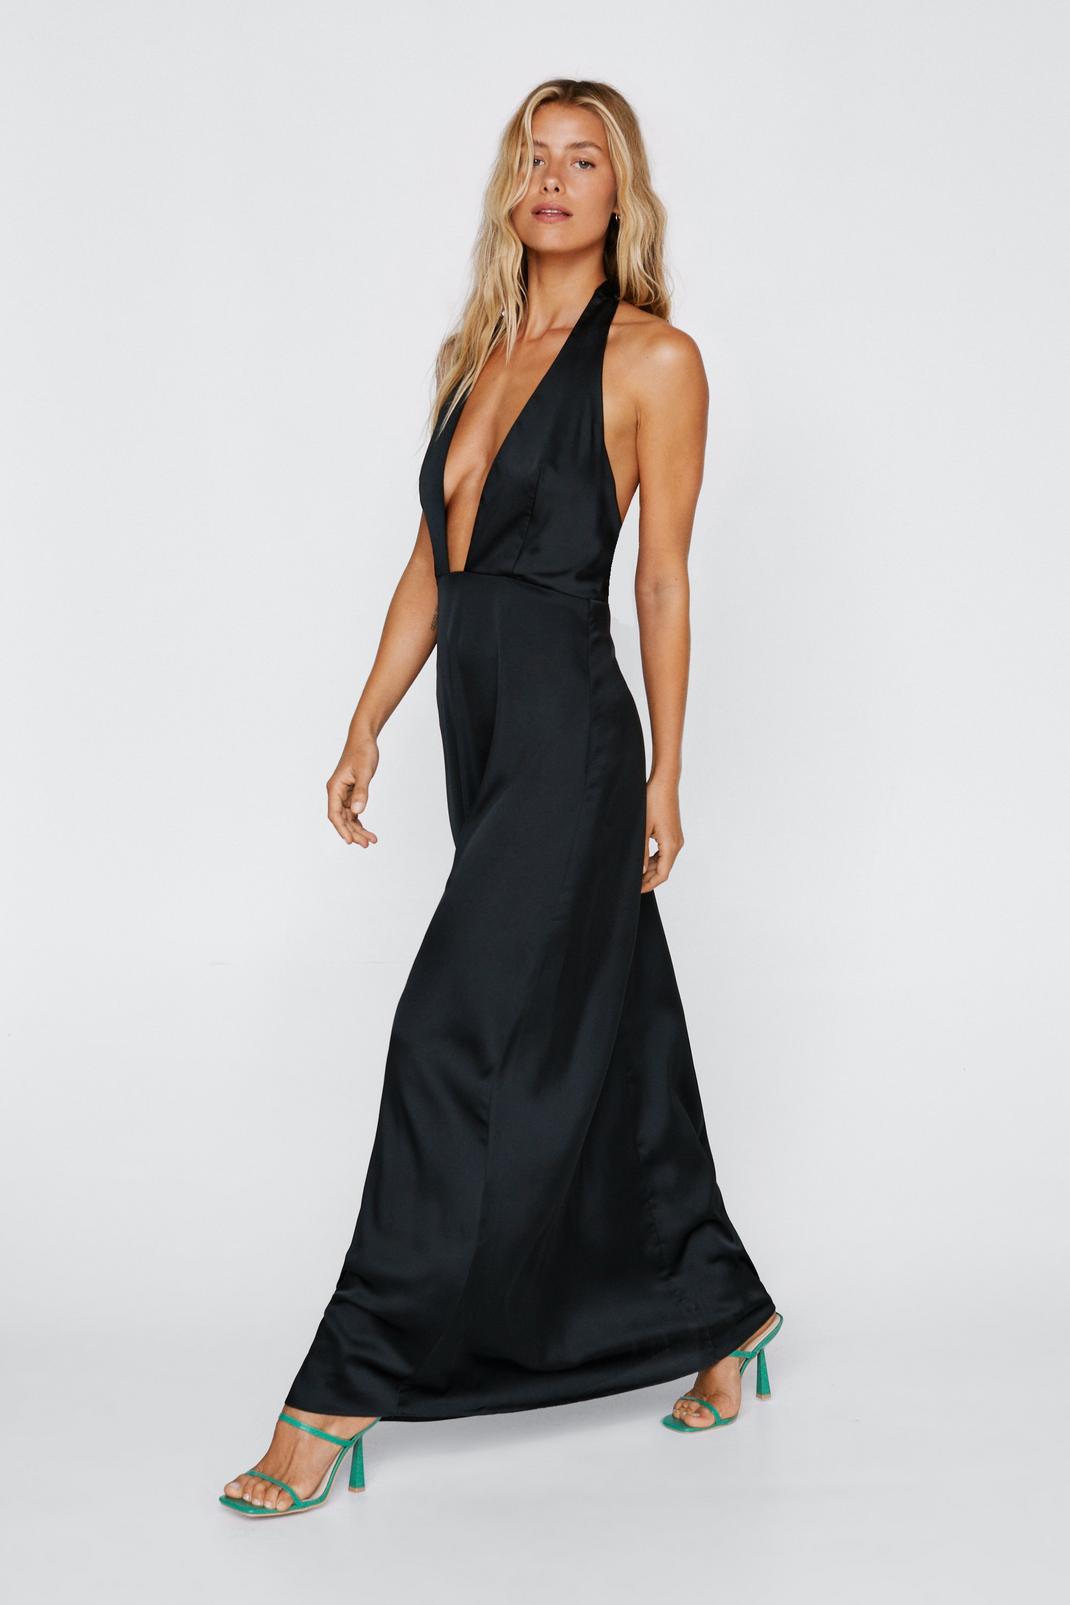 FITTED STRAPPY HALTER DRESS - Black